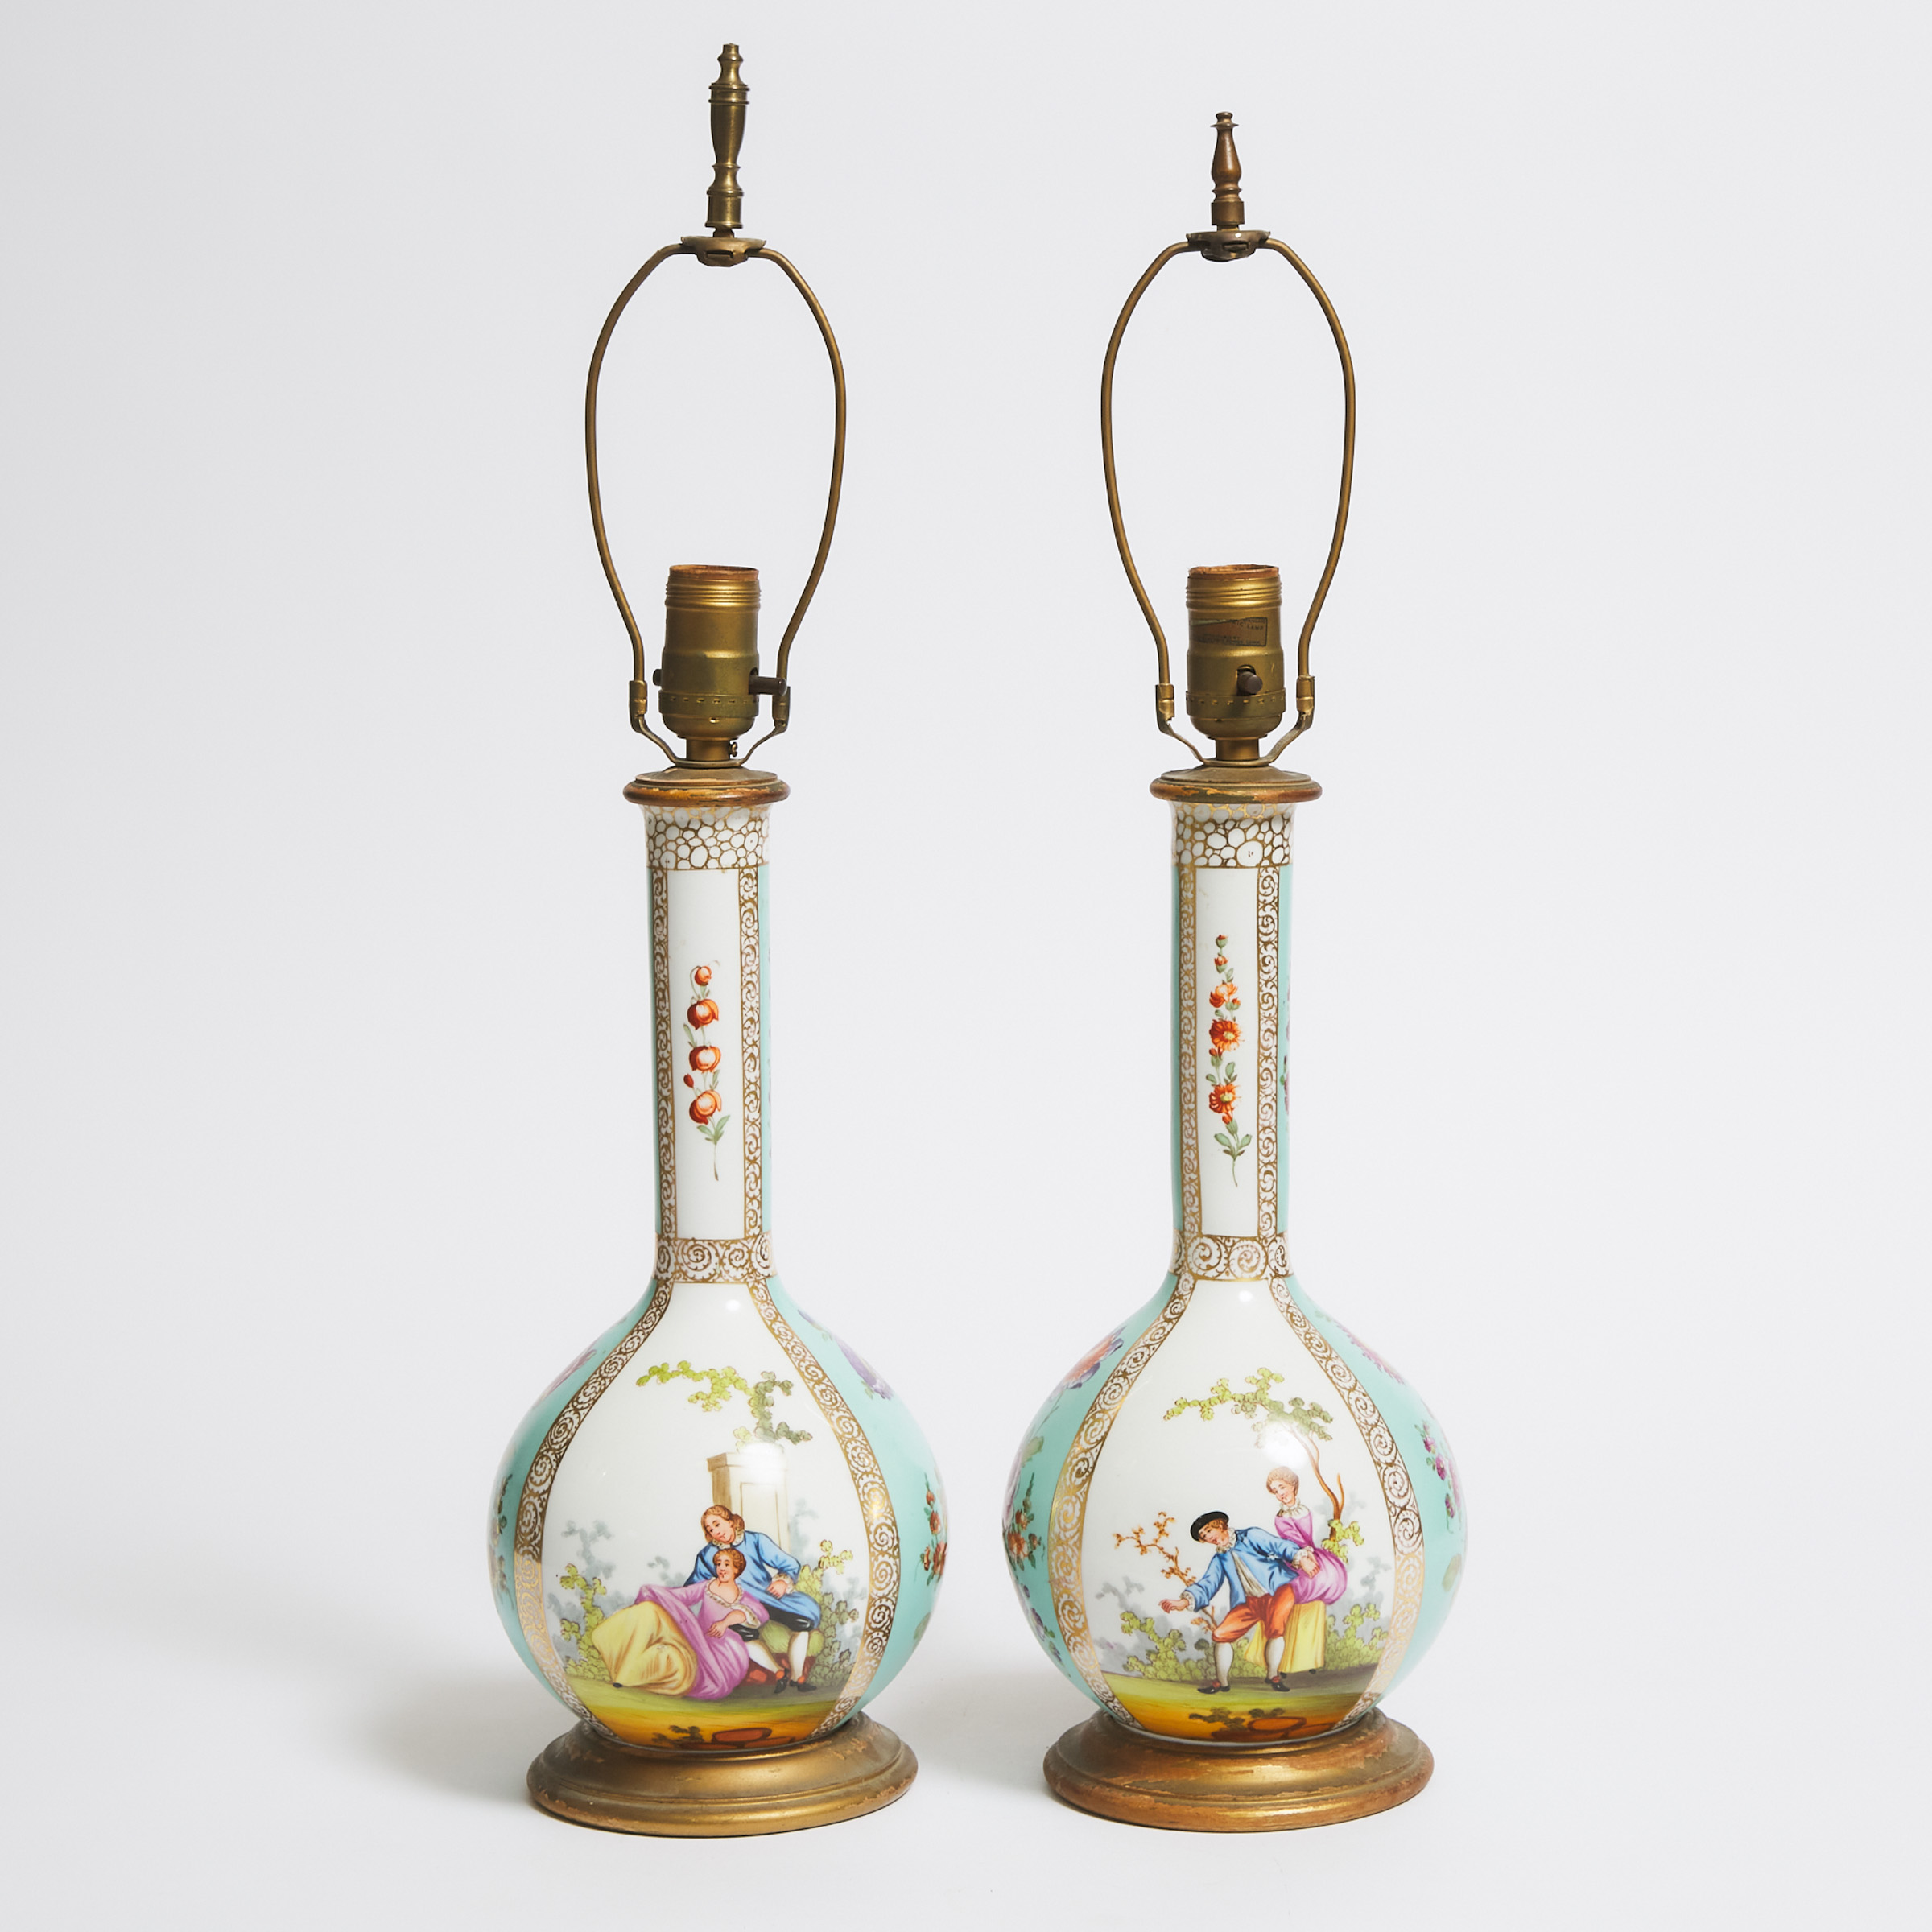 Pair of Dresden Table Lamps, probably